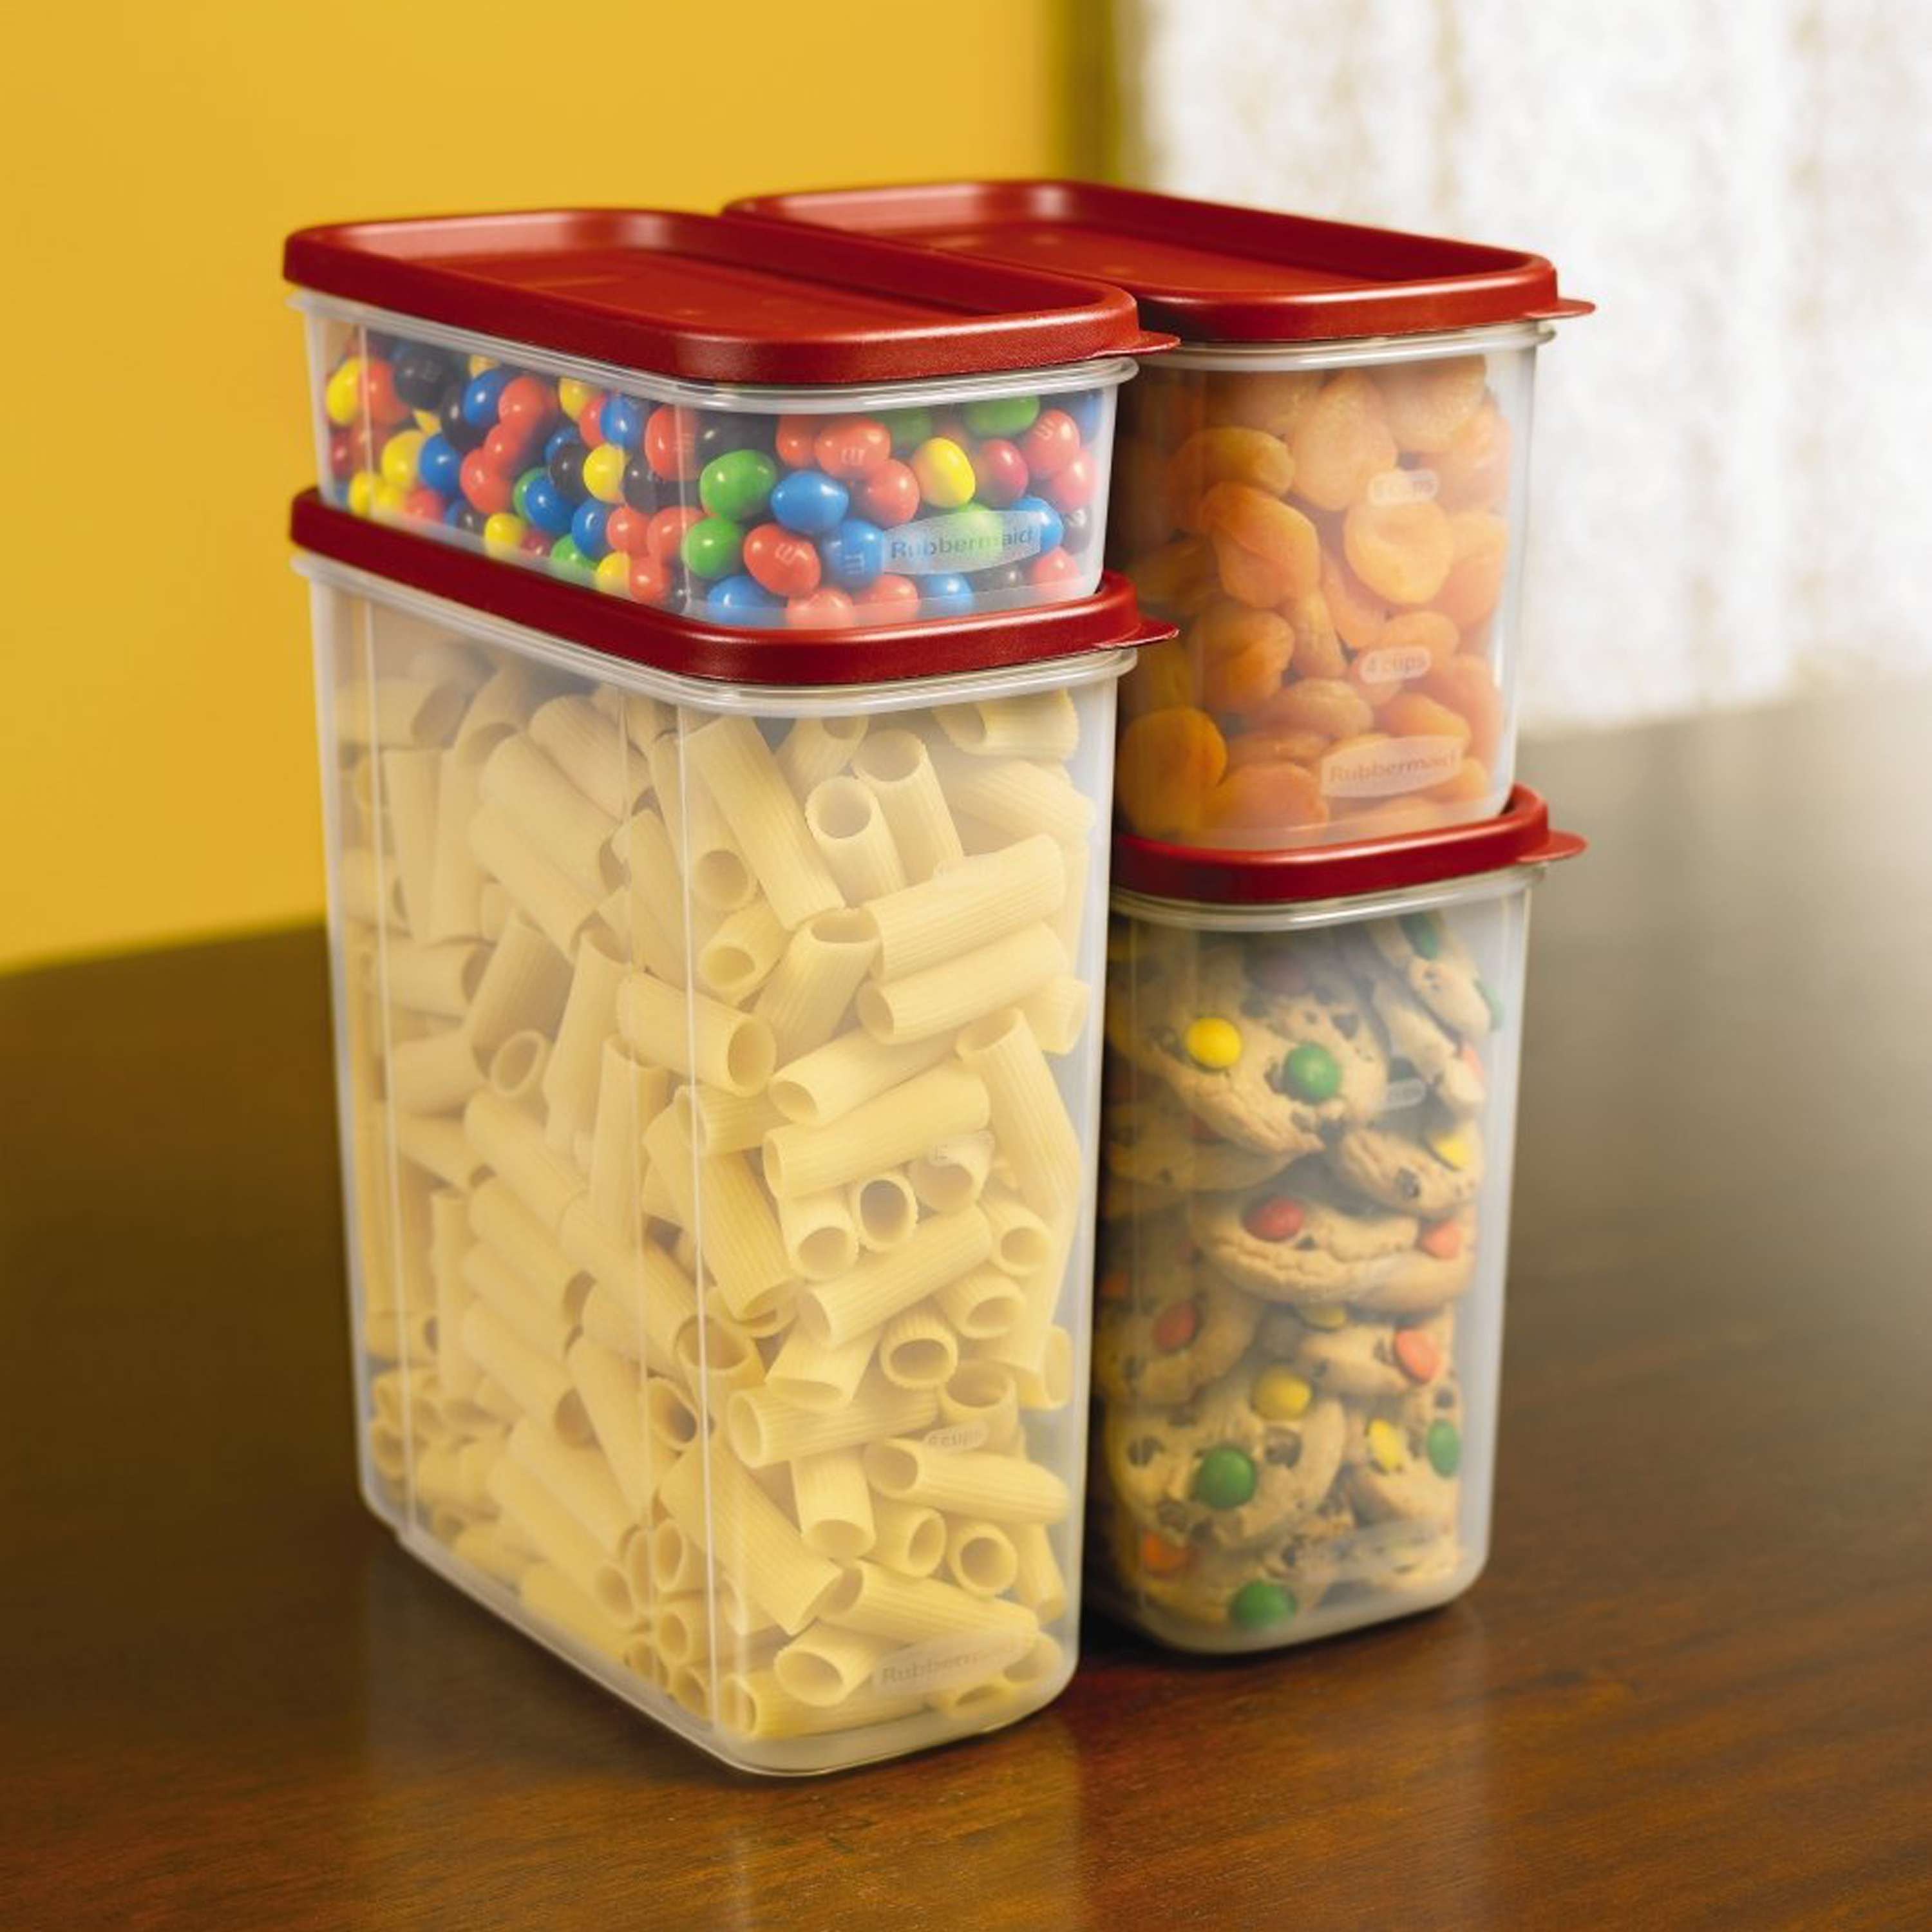 Rubbermaid Modular Pantry Canister Set, 8pcs - image 4 of 12